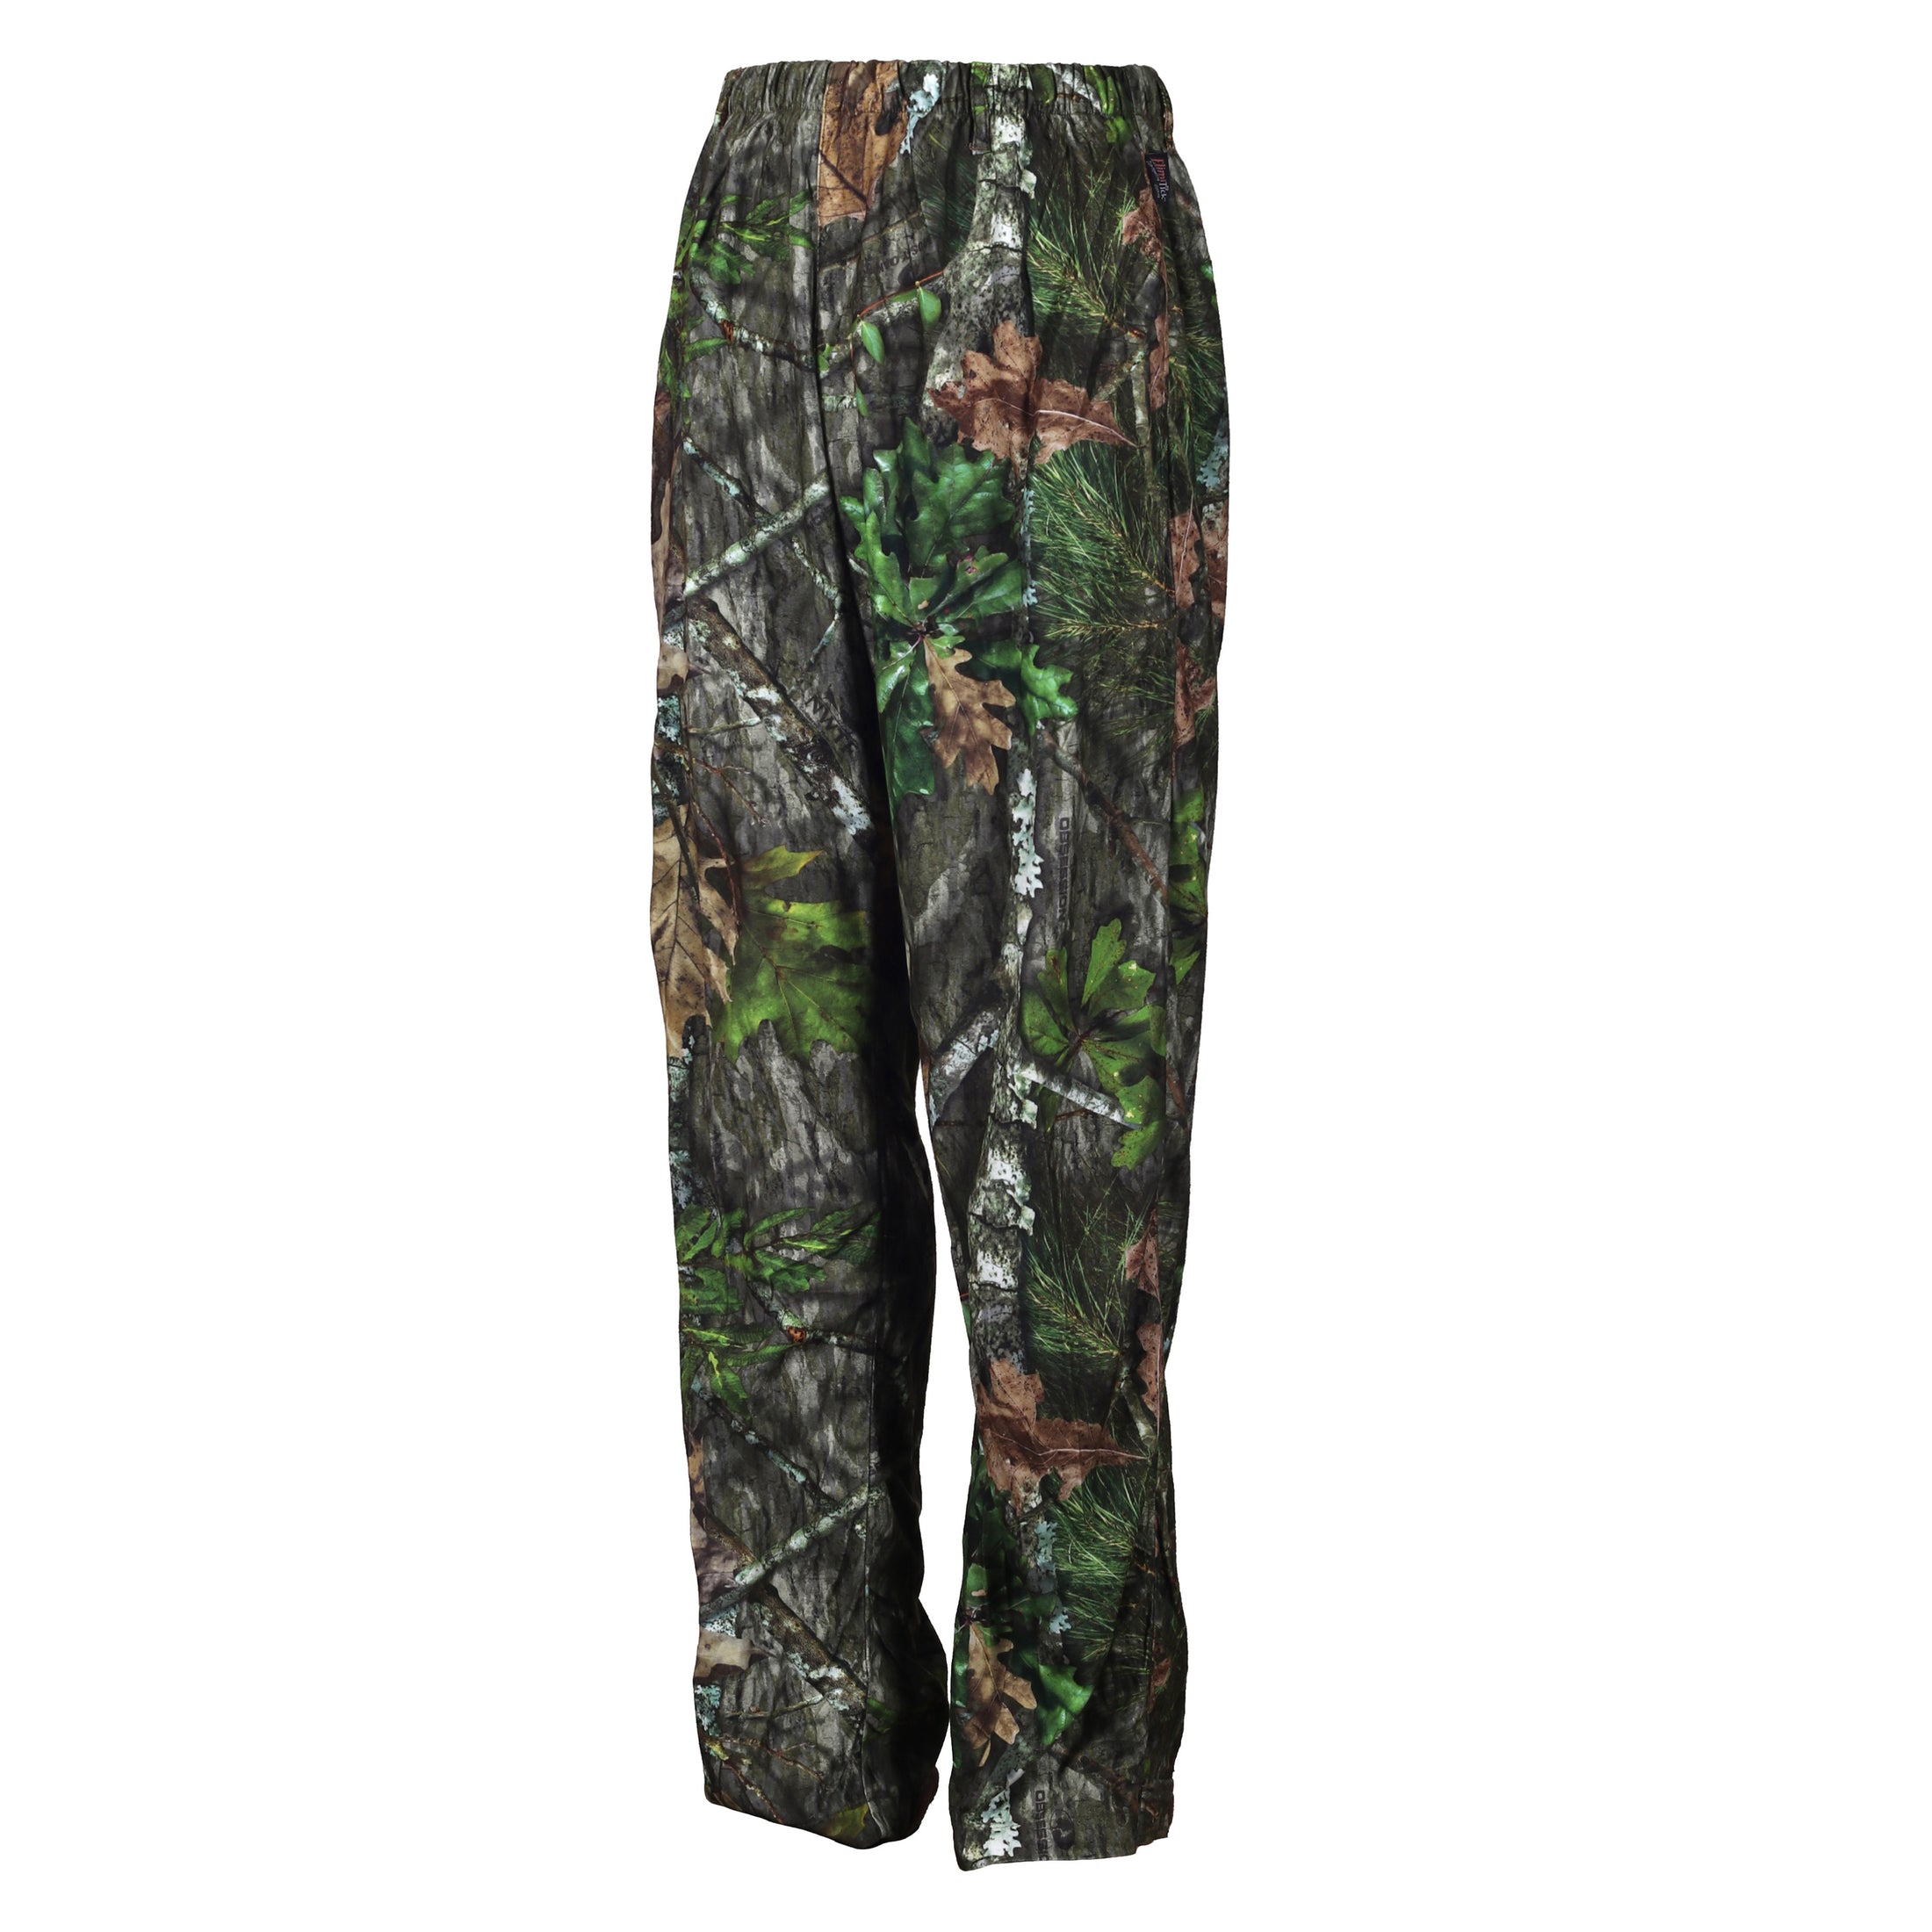 gamehdie ElimiTick Insect Repellent Cover Up Pant front (mossy oak obsession)